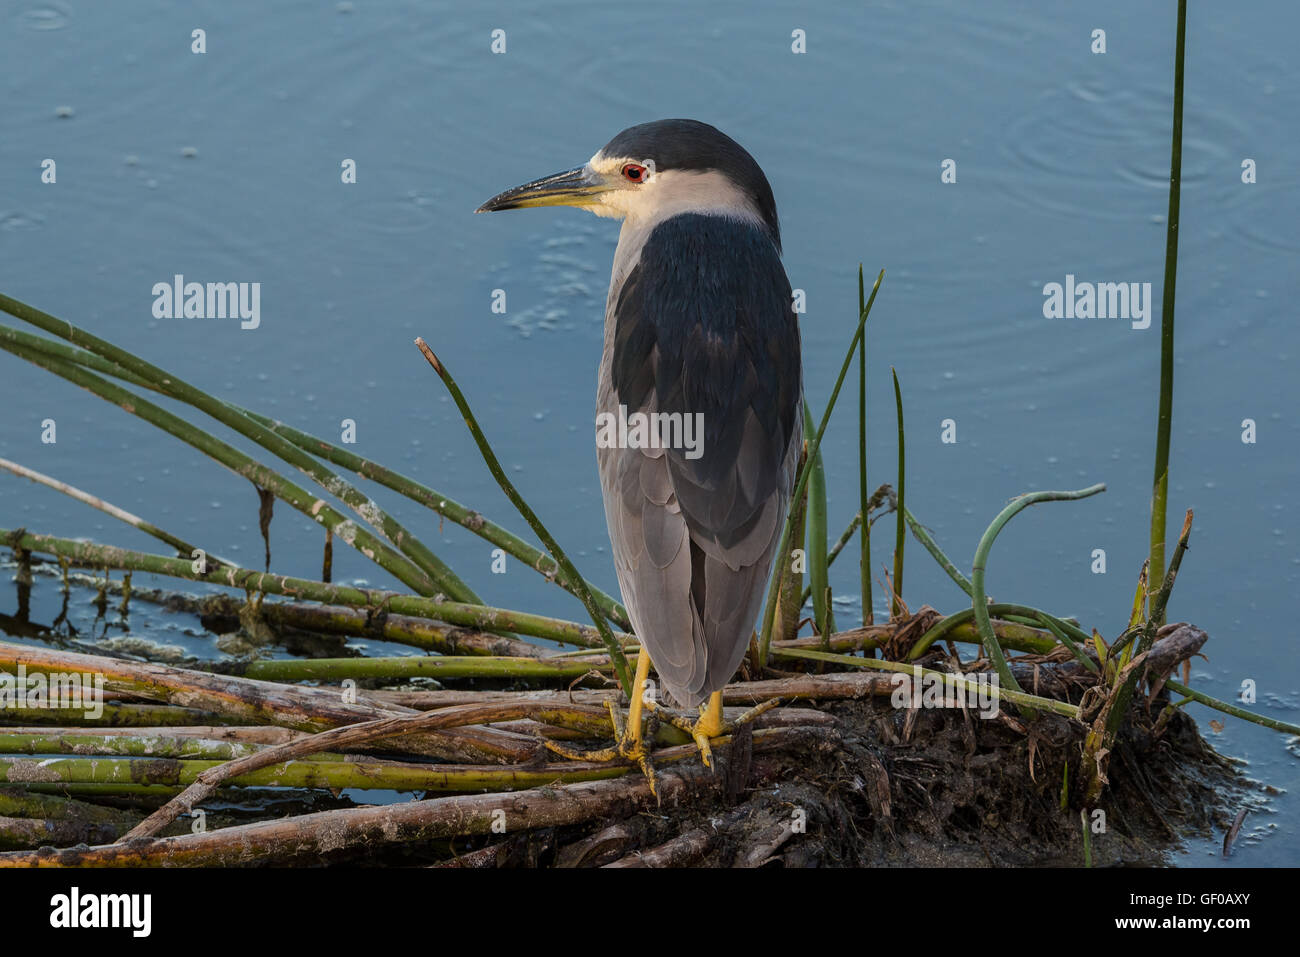 Black-Crown Night Heron bird perched on grass is the marsh Stock Photo